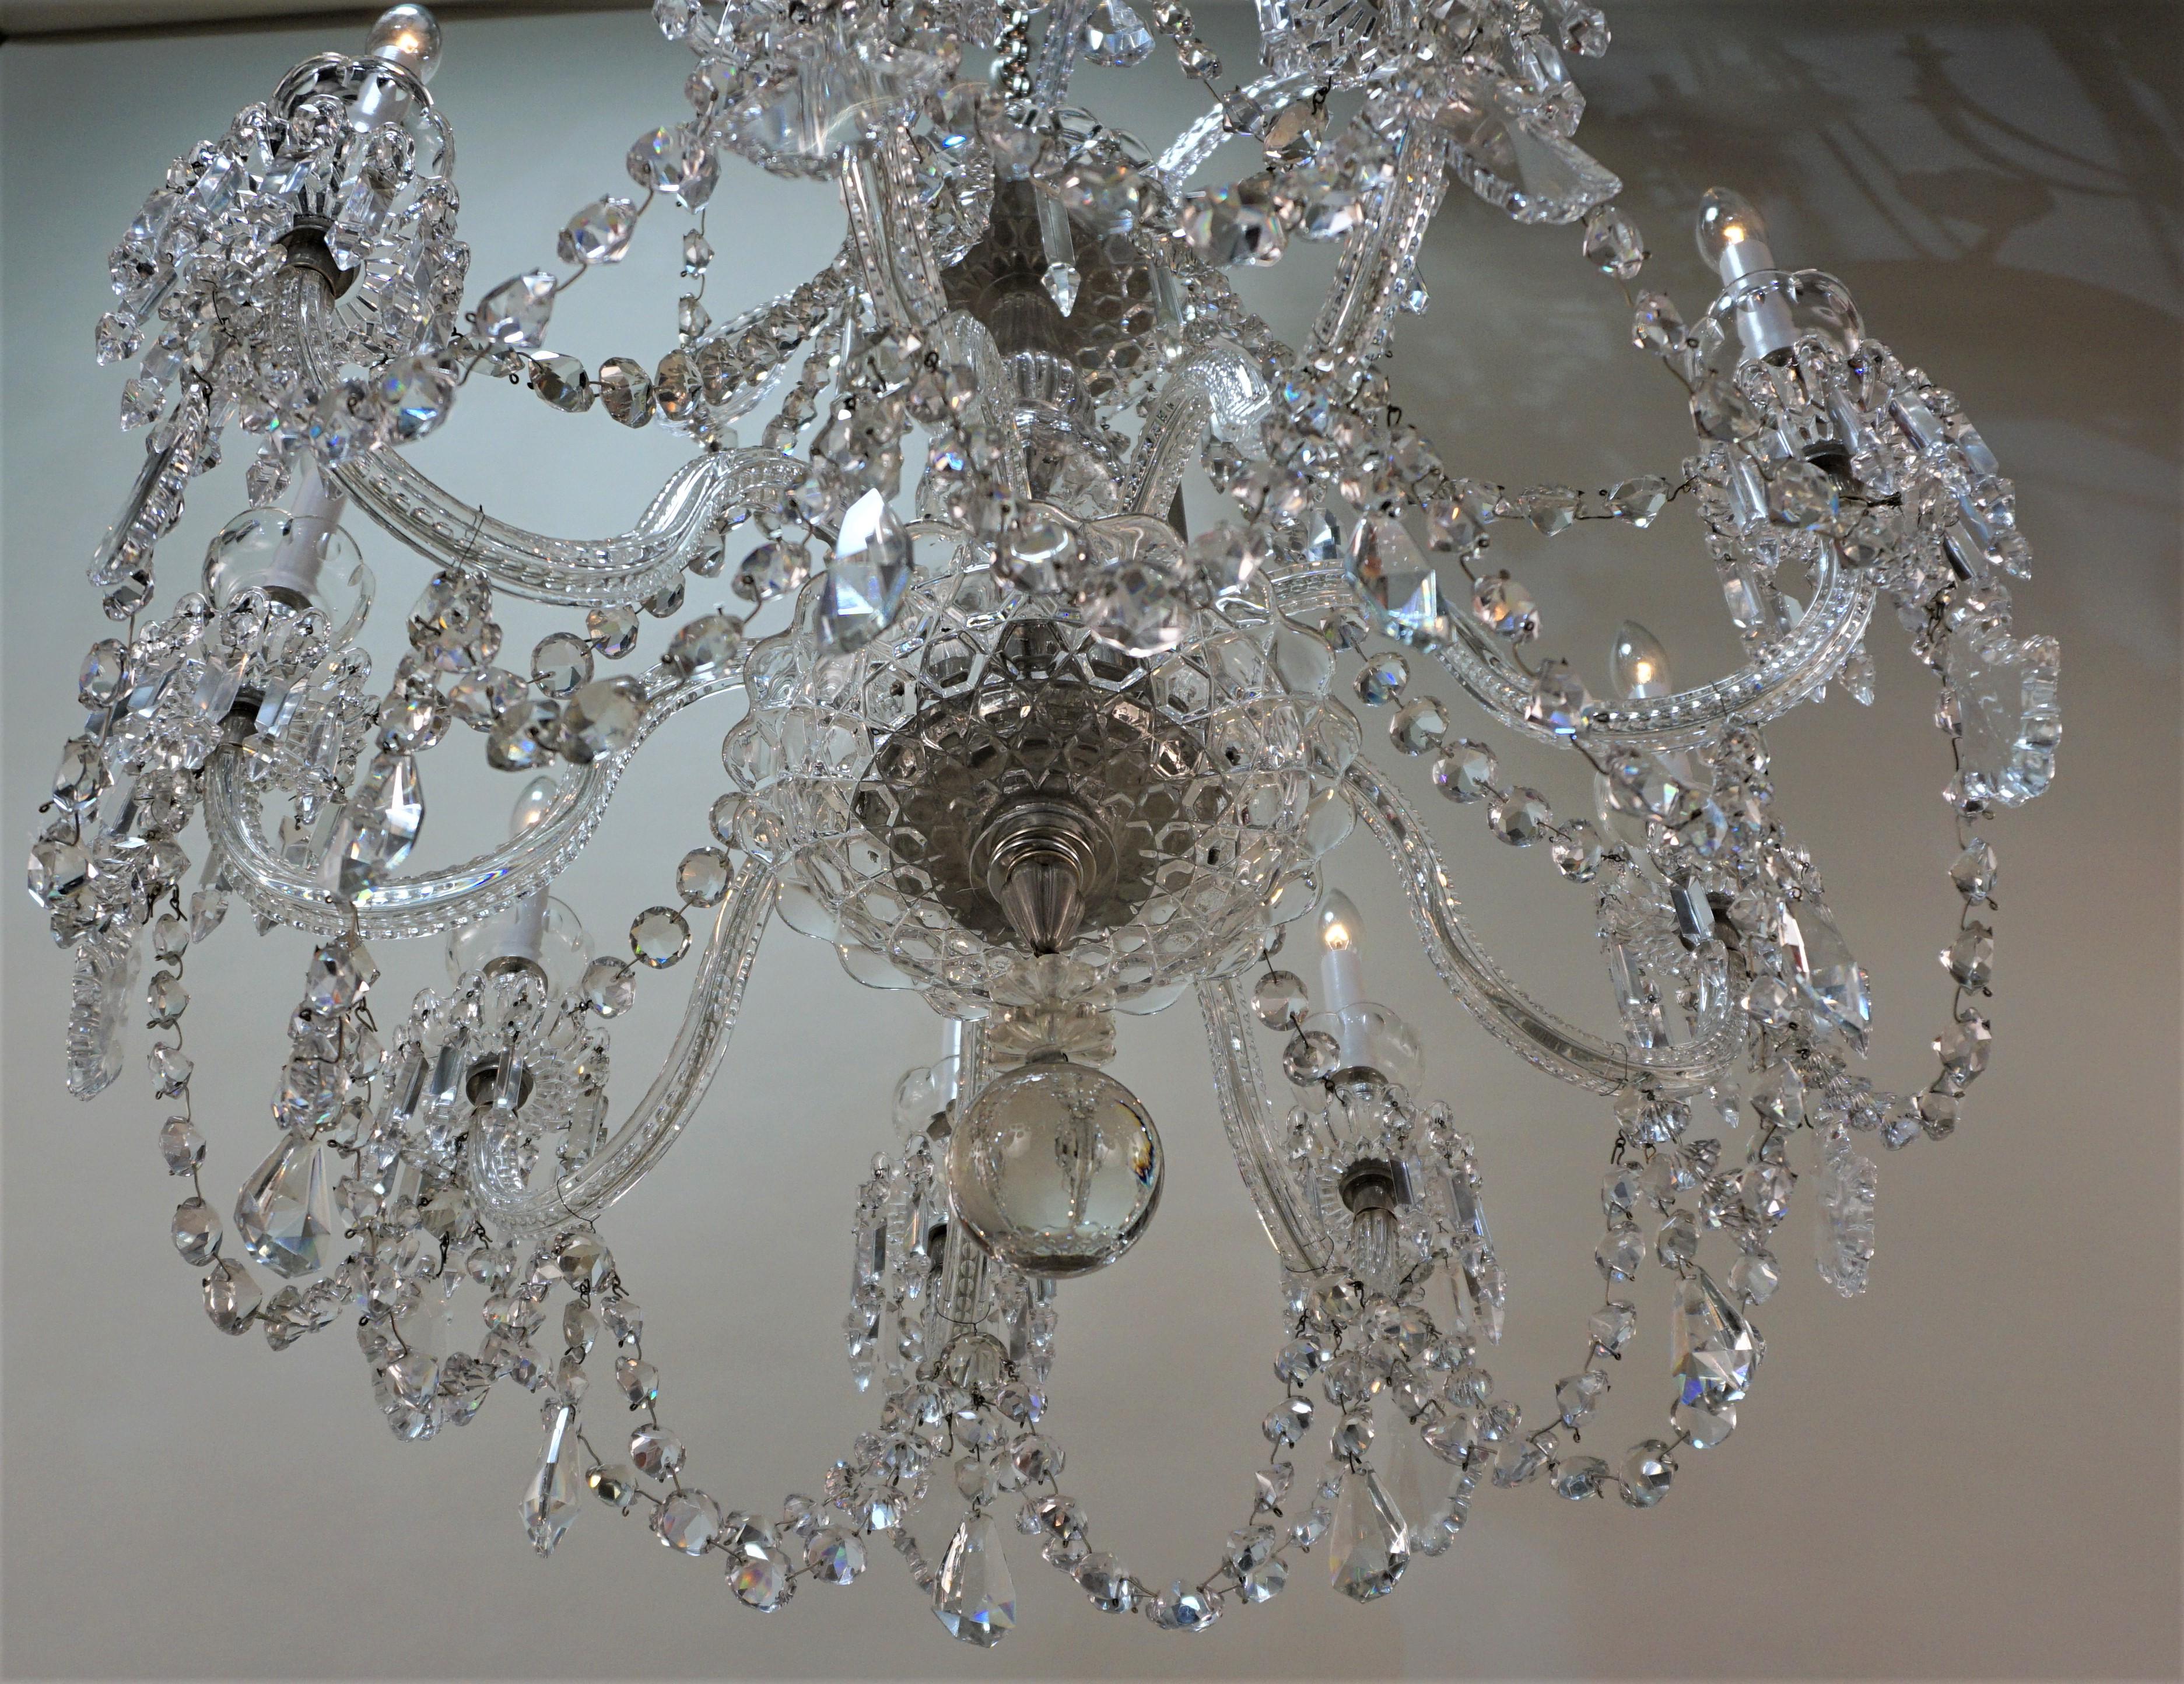 This beautiful nine-light chandelier is crafted by master glassblowers and cutters in France circa 1920s in Saint Louis crystal company.
Marked St Louis.
Measures: 32